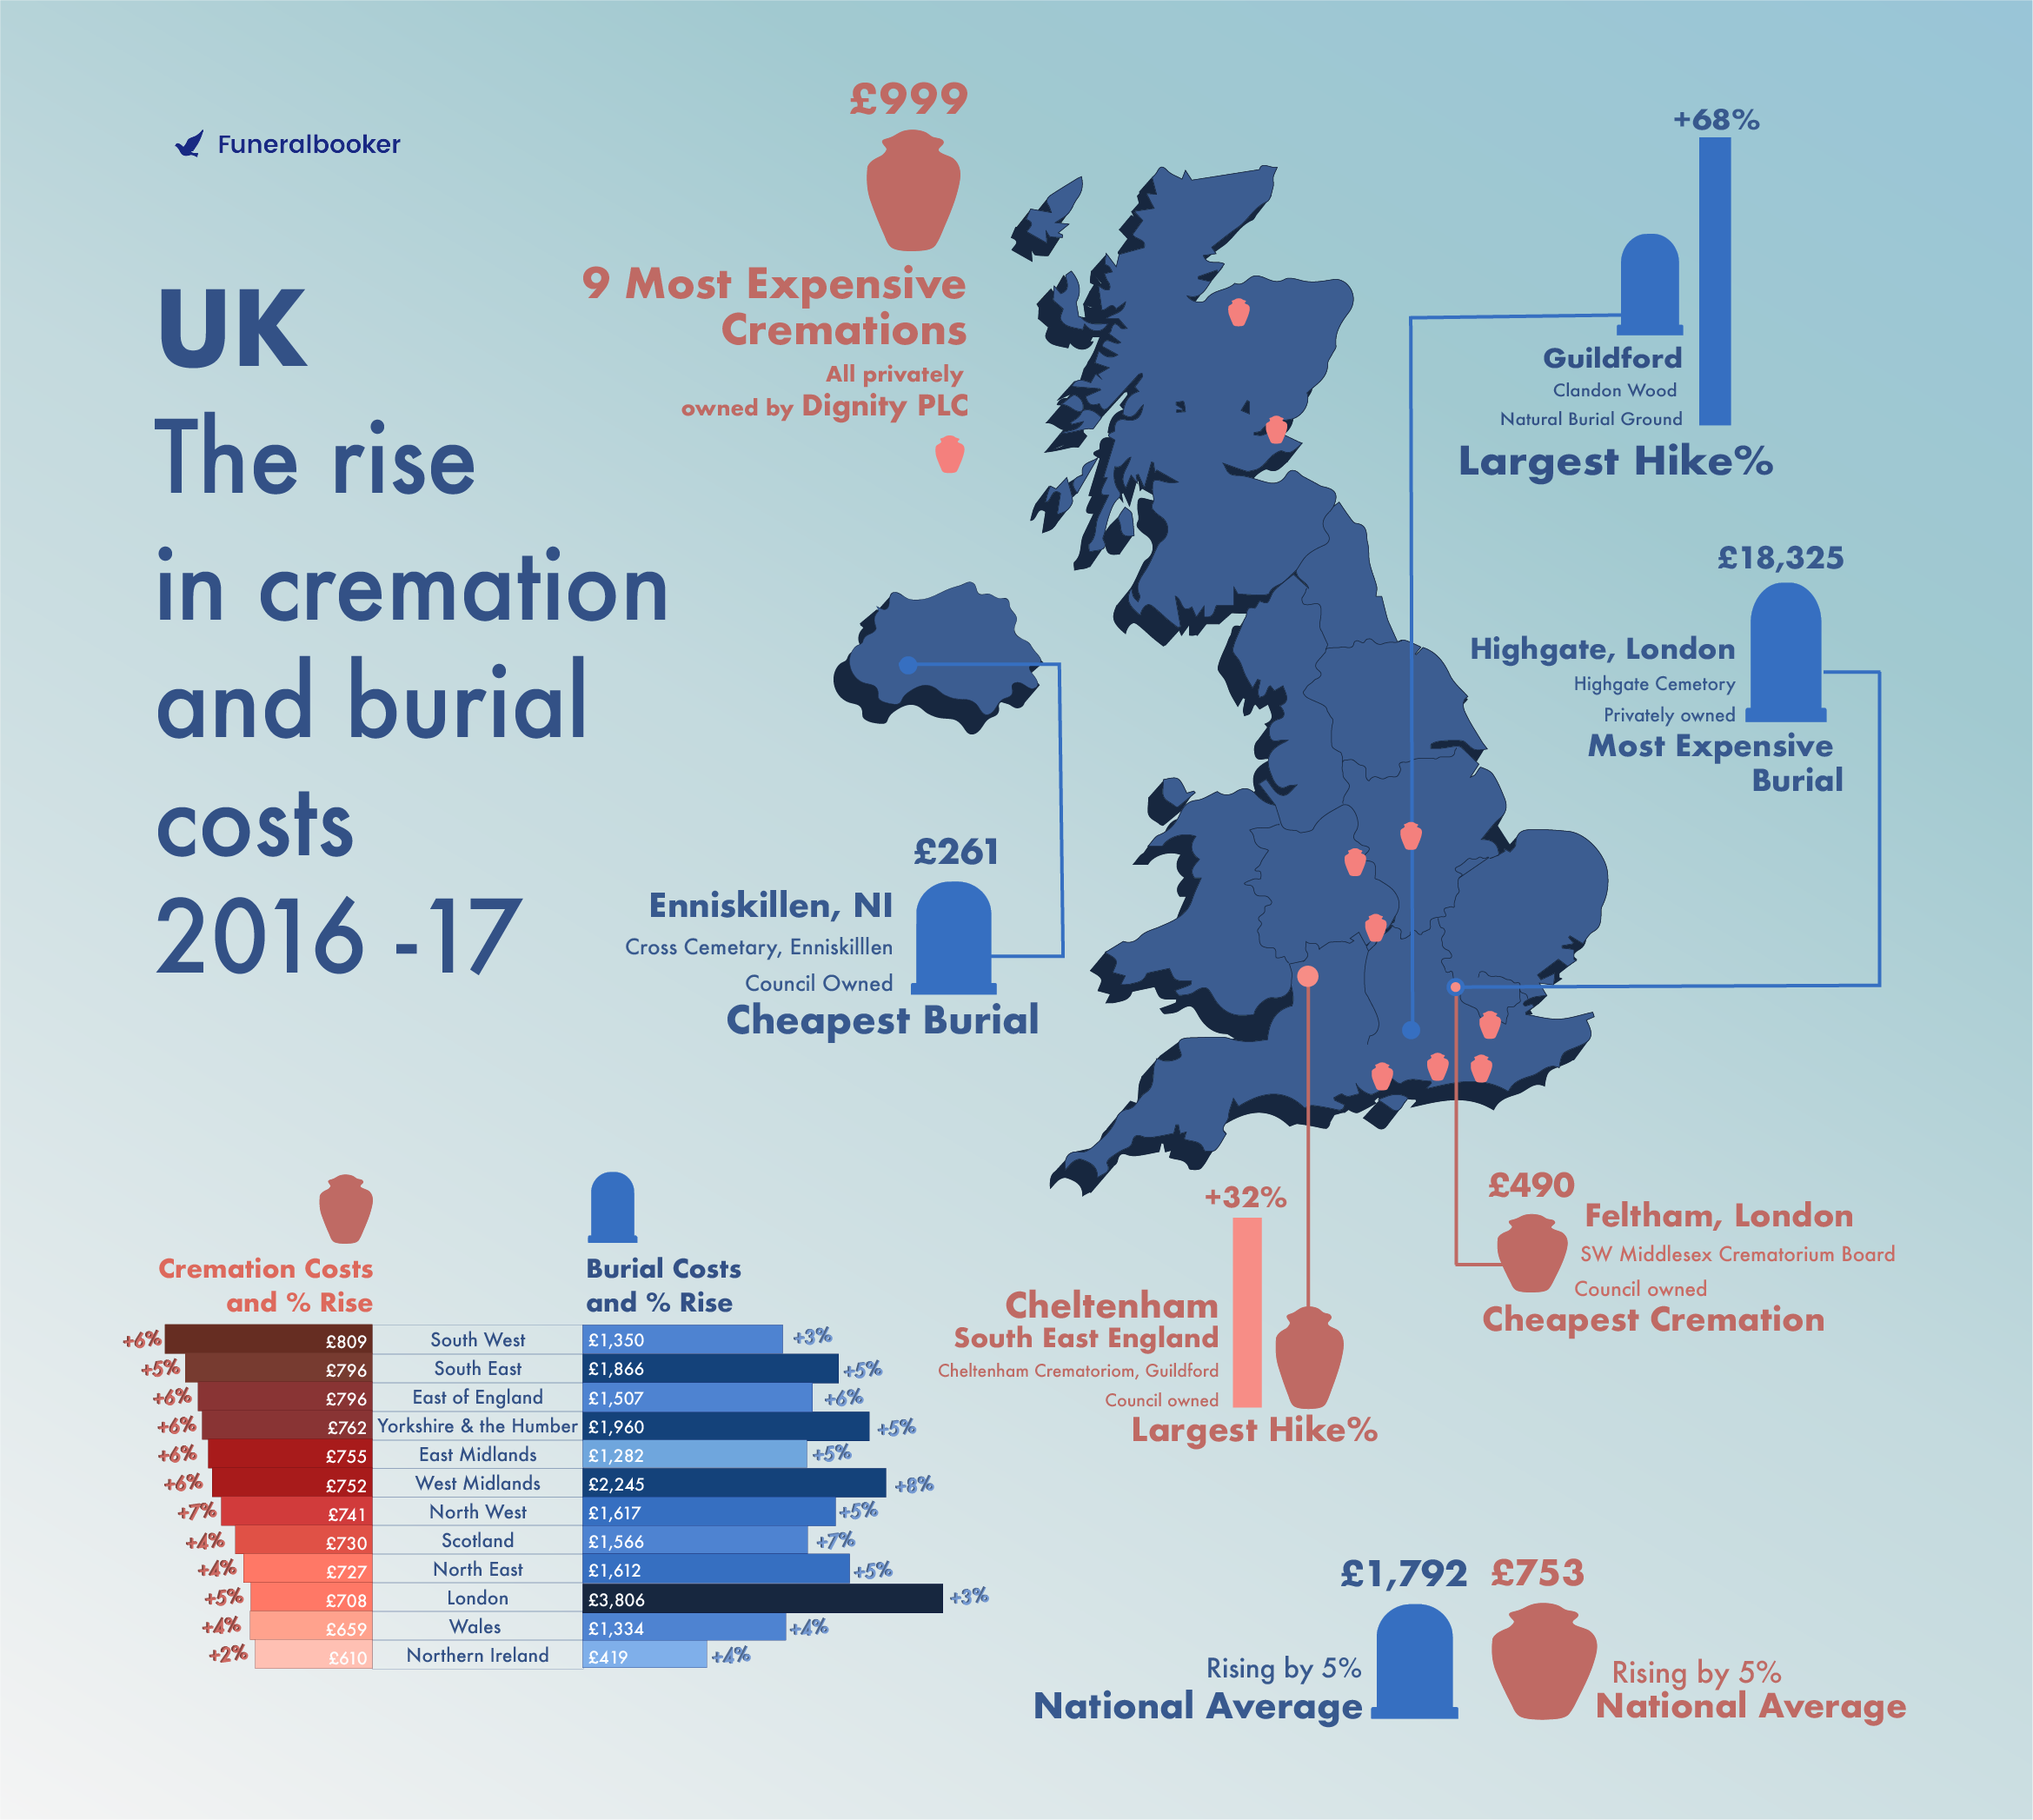 The rise in UK cremation and burial costs 2016 / 2017